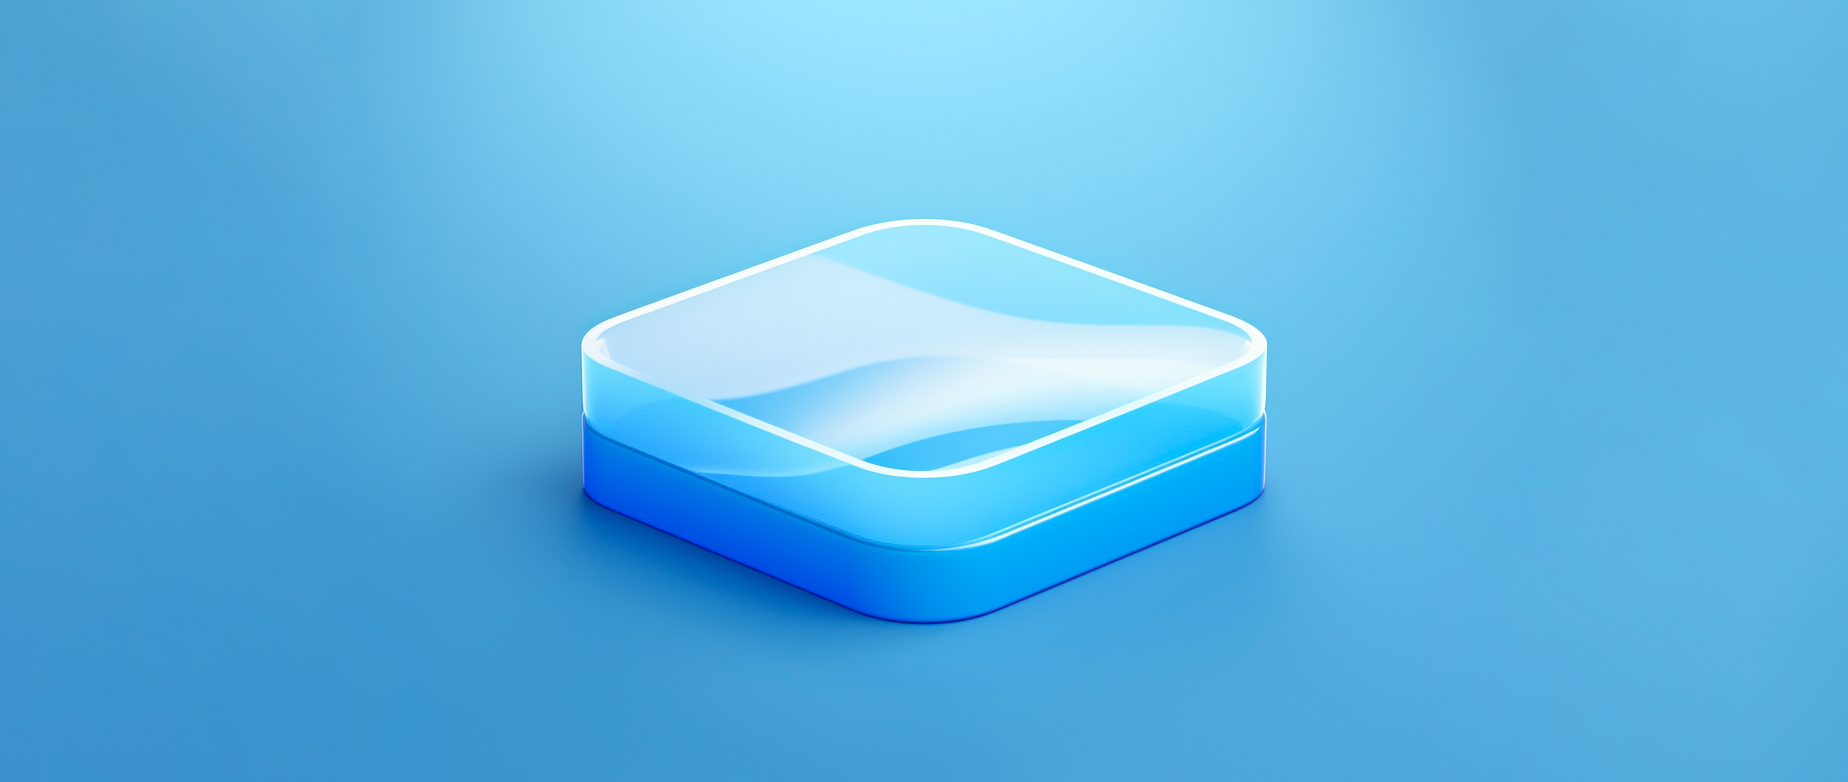 image of a light blue 3D square representing cheap ecommerce platforms